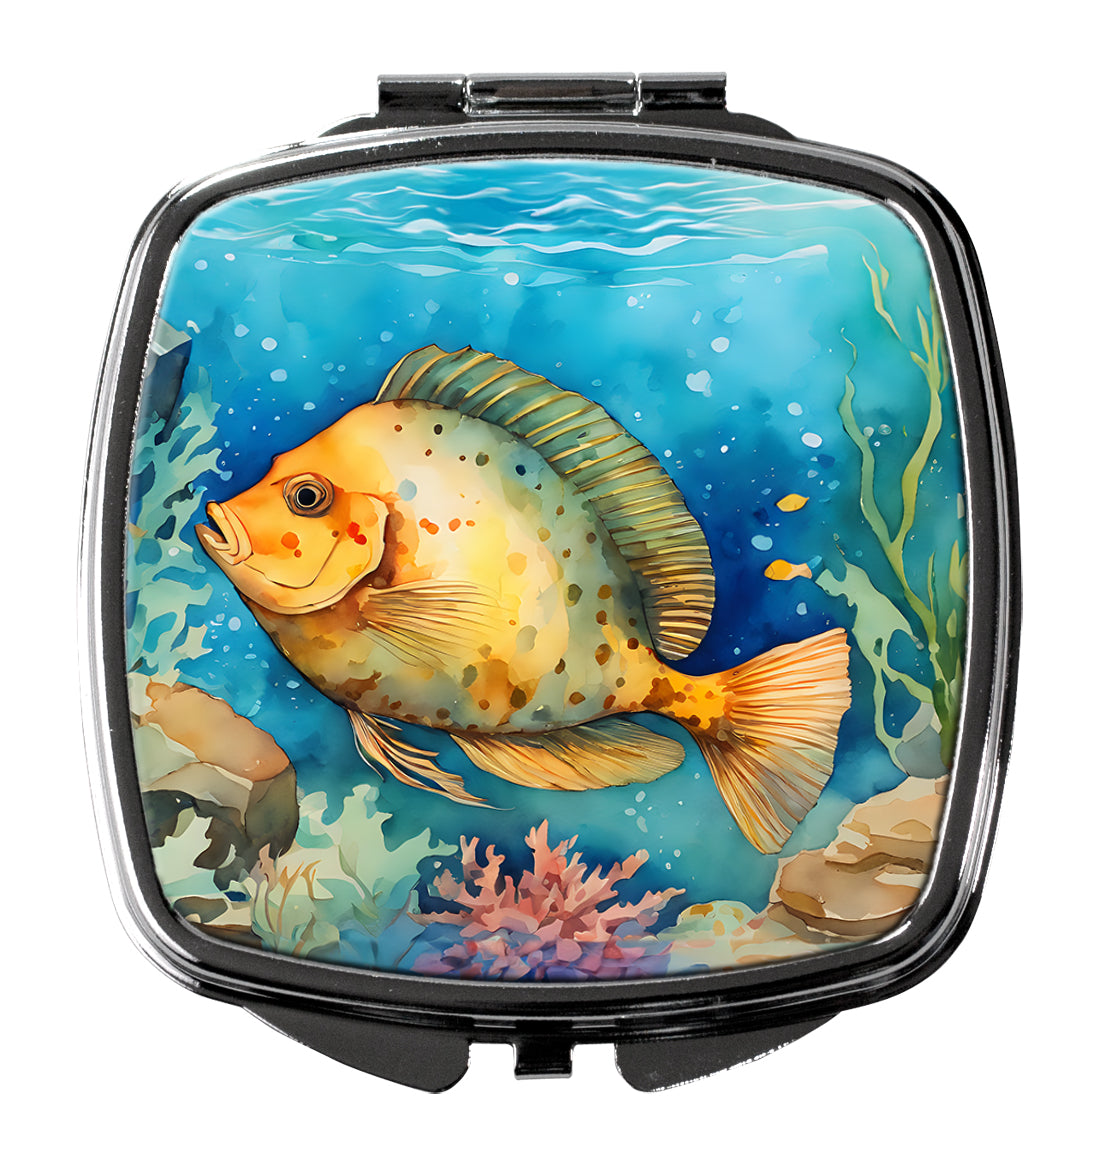 Buy this Flounder Compact Mirror